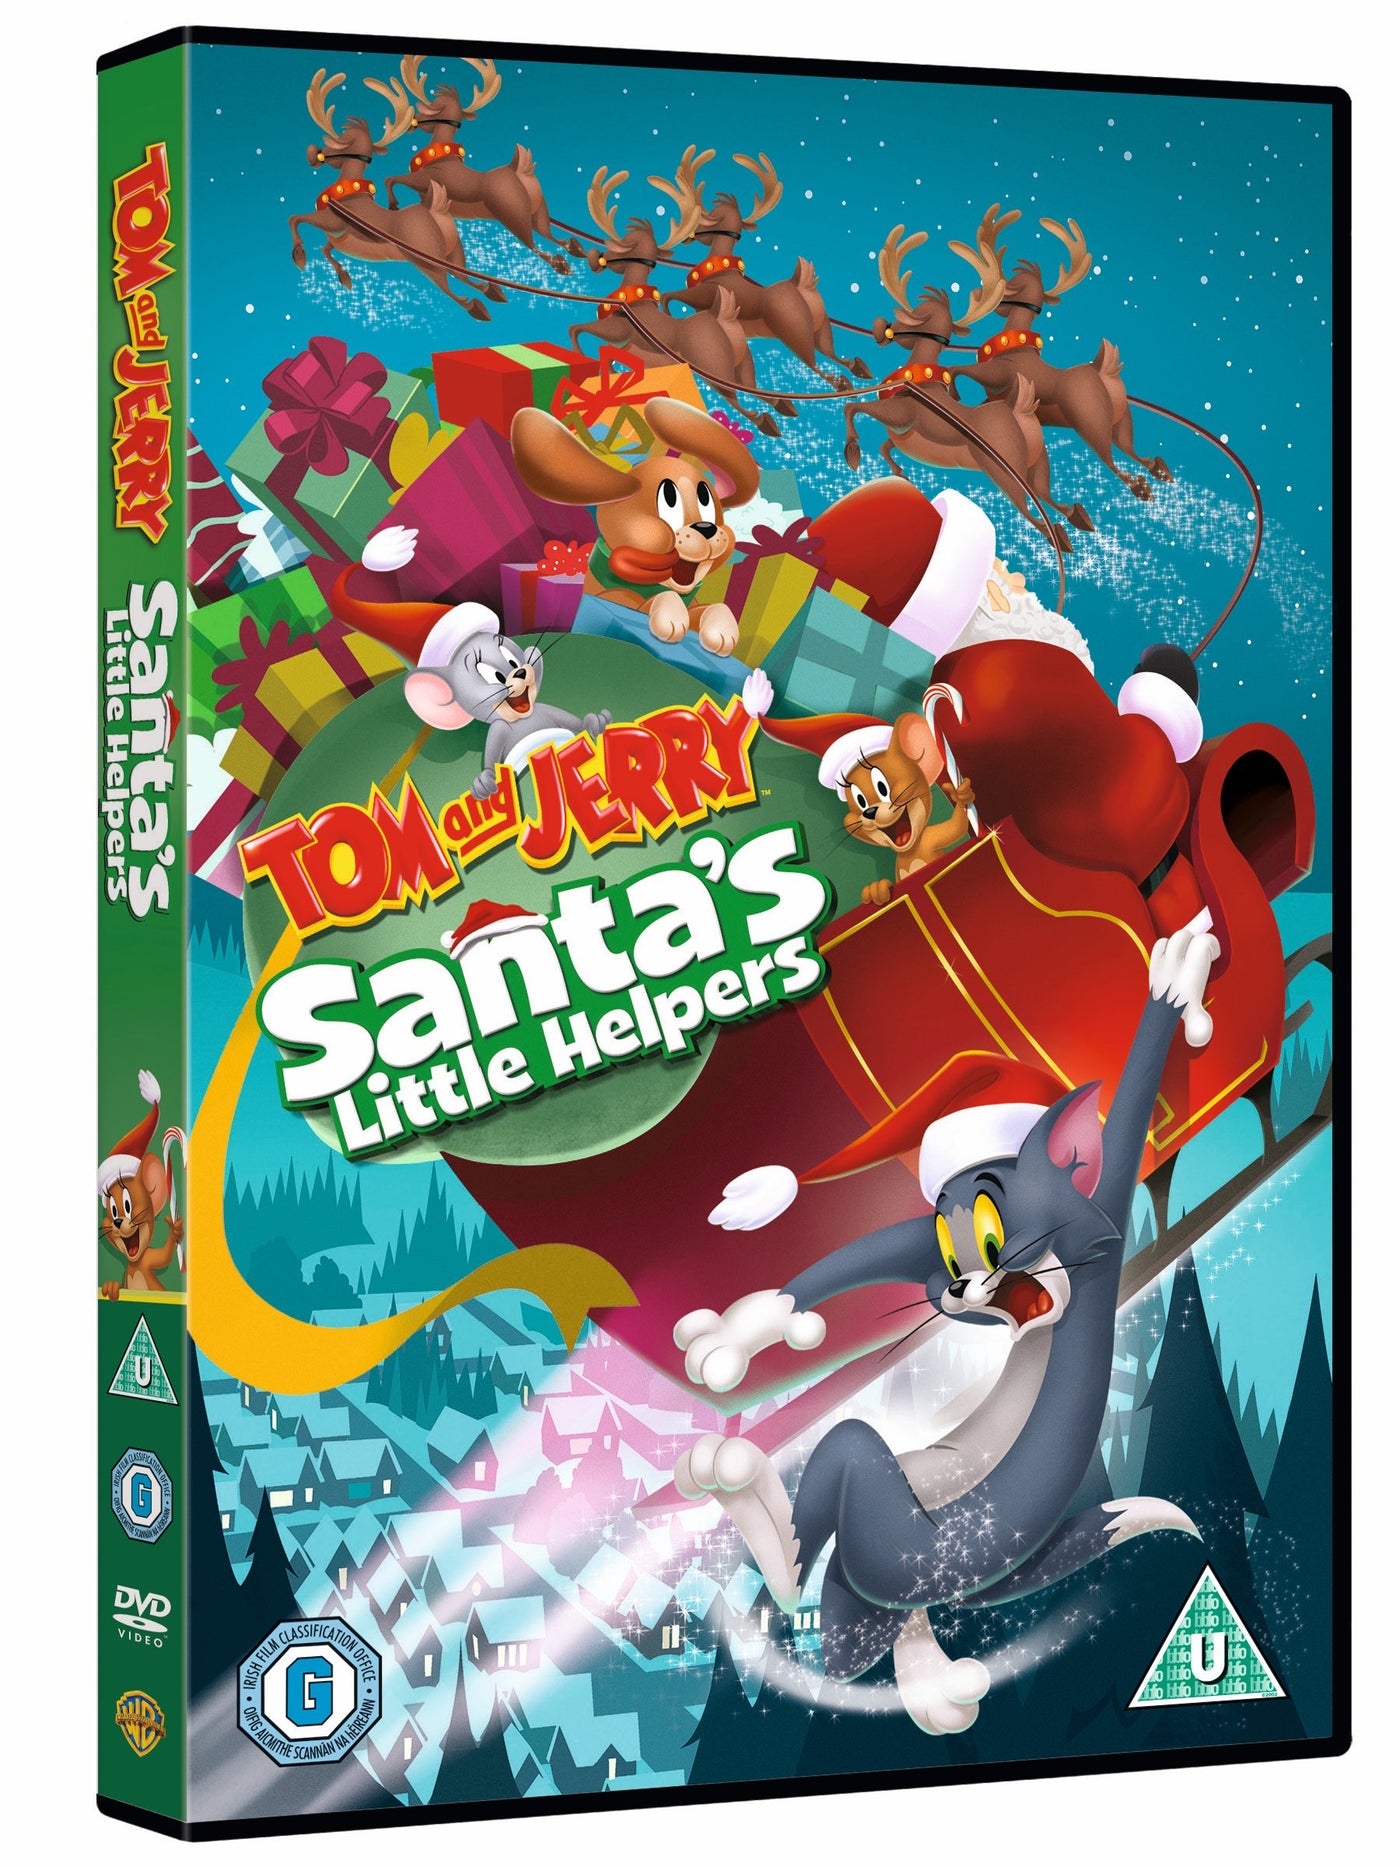 Tom And Jerry's Santa's Little Helpers [2014] (DVD)